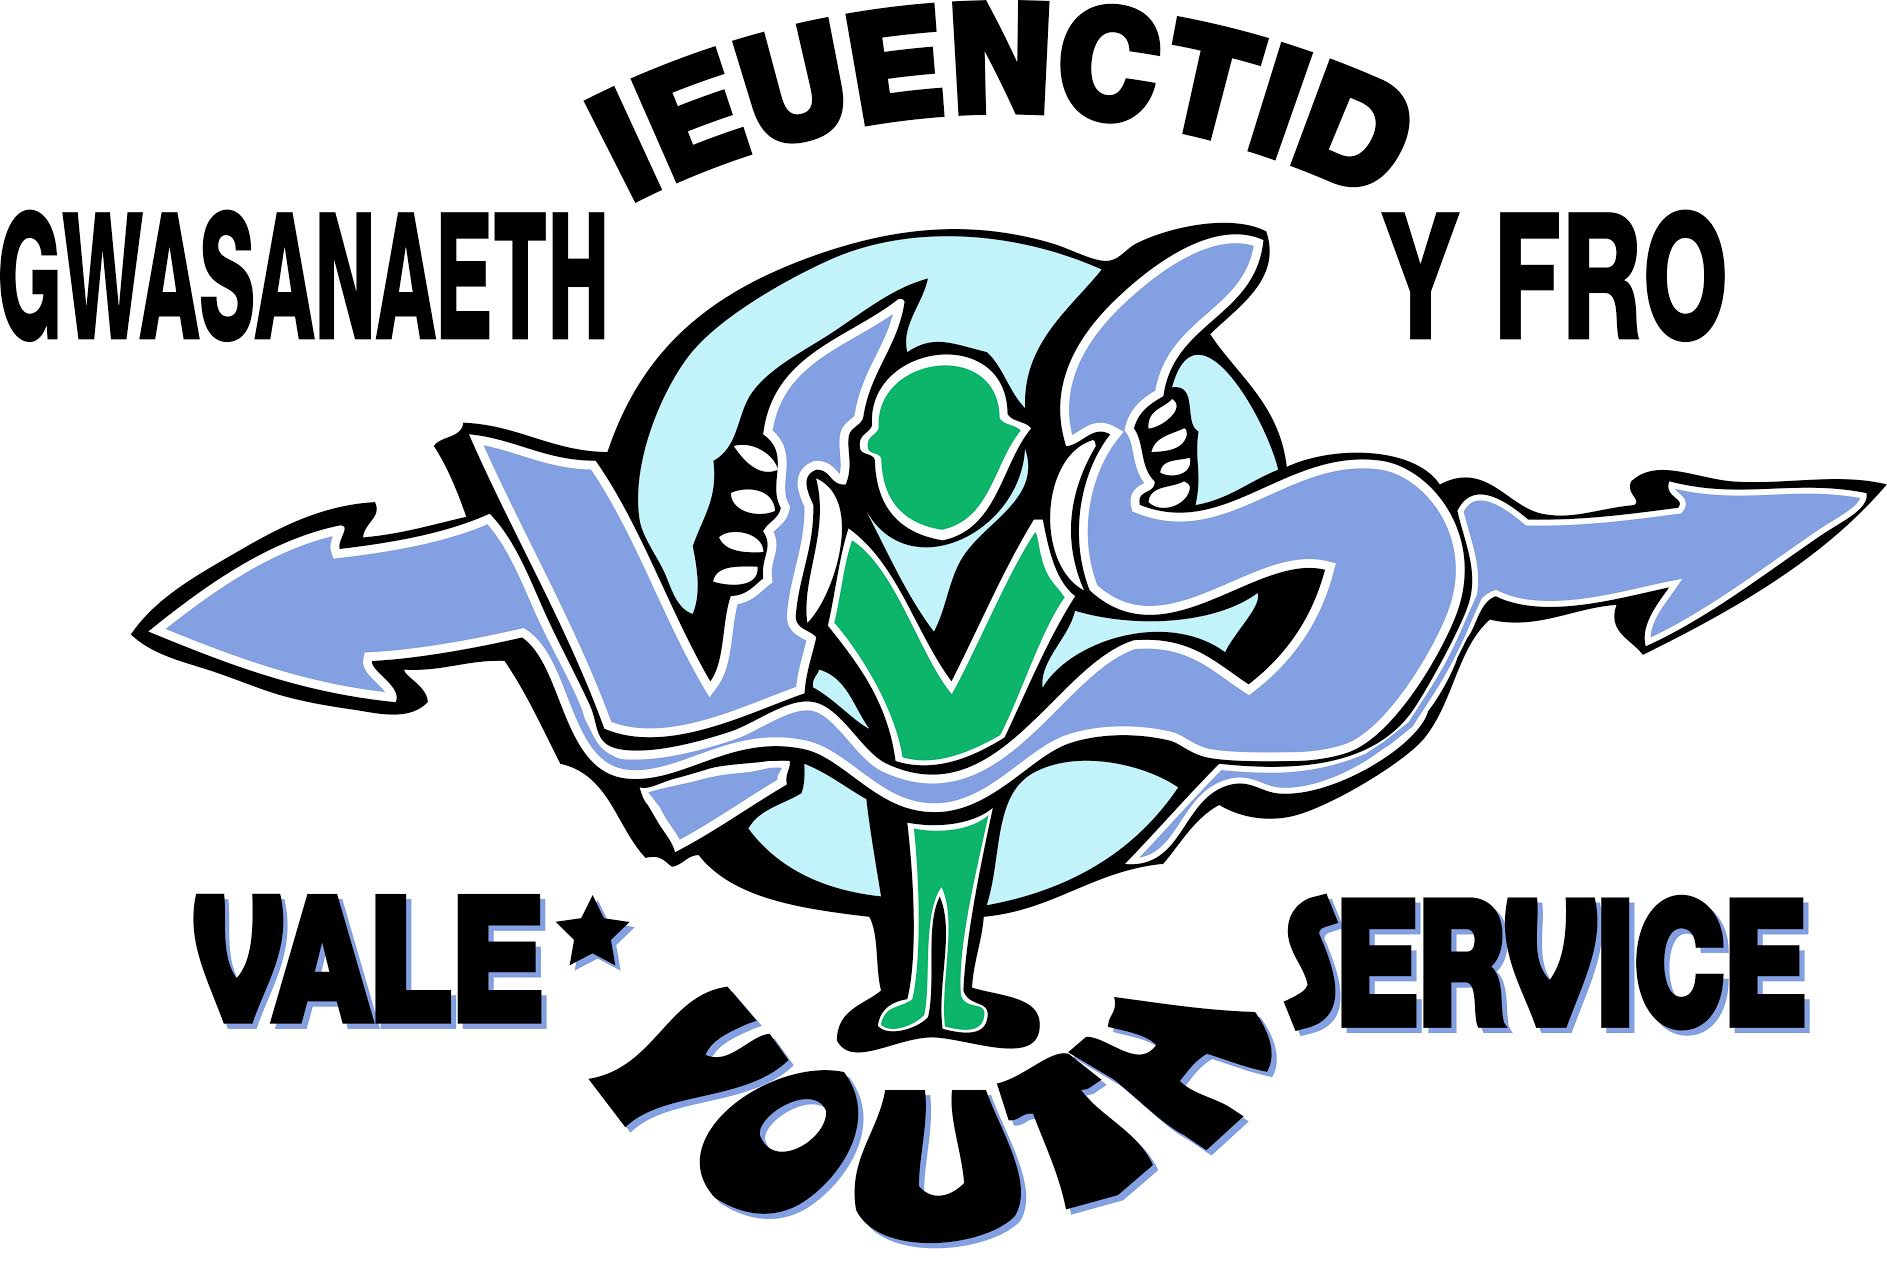 Vale Youth service